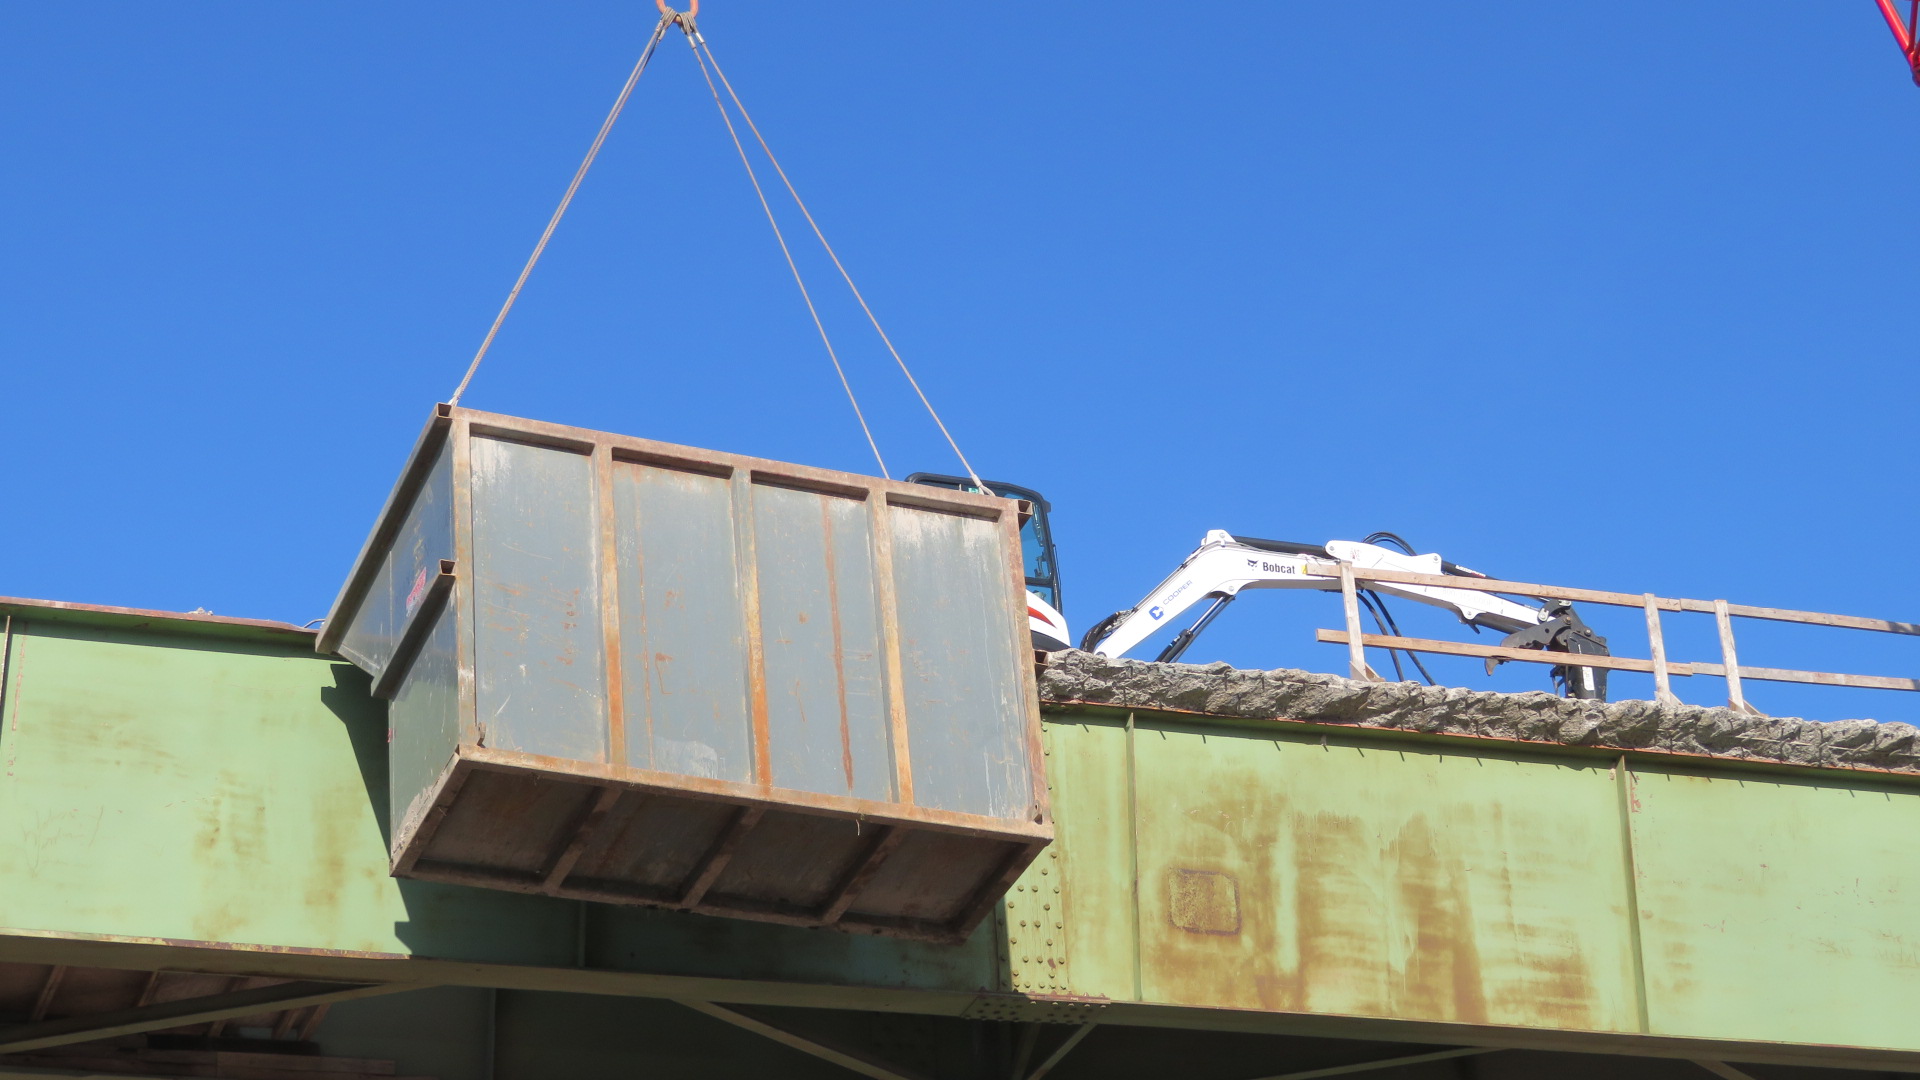 View from below of concrete deck removals, containment bin